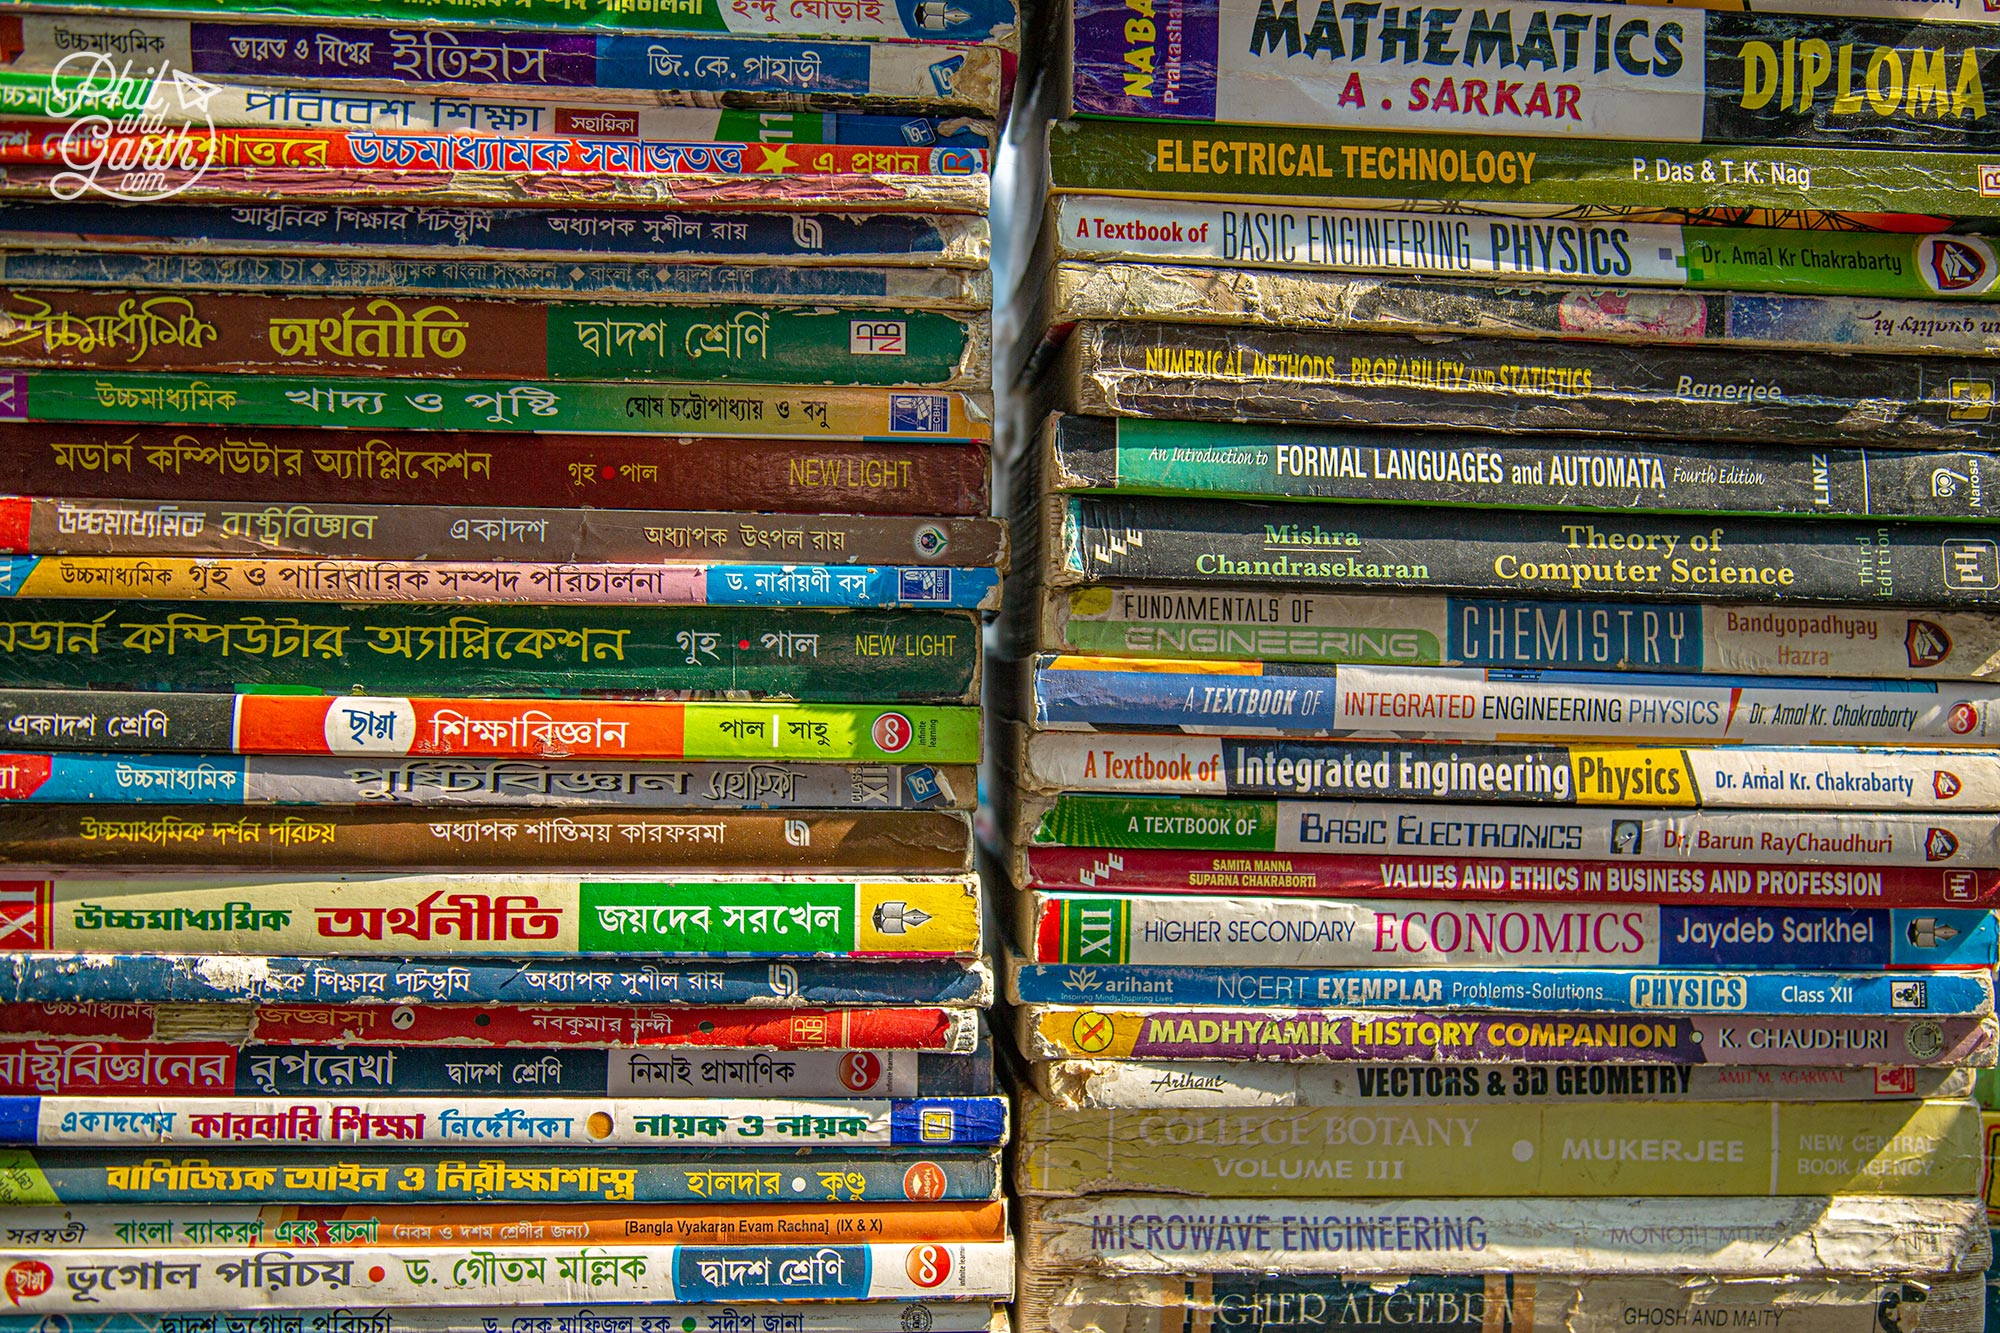 Second hand educational books for sale on College Street Kolkata